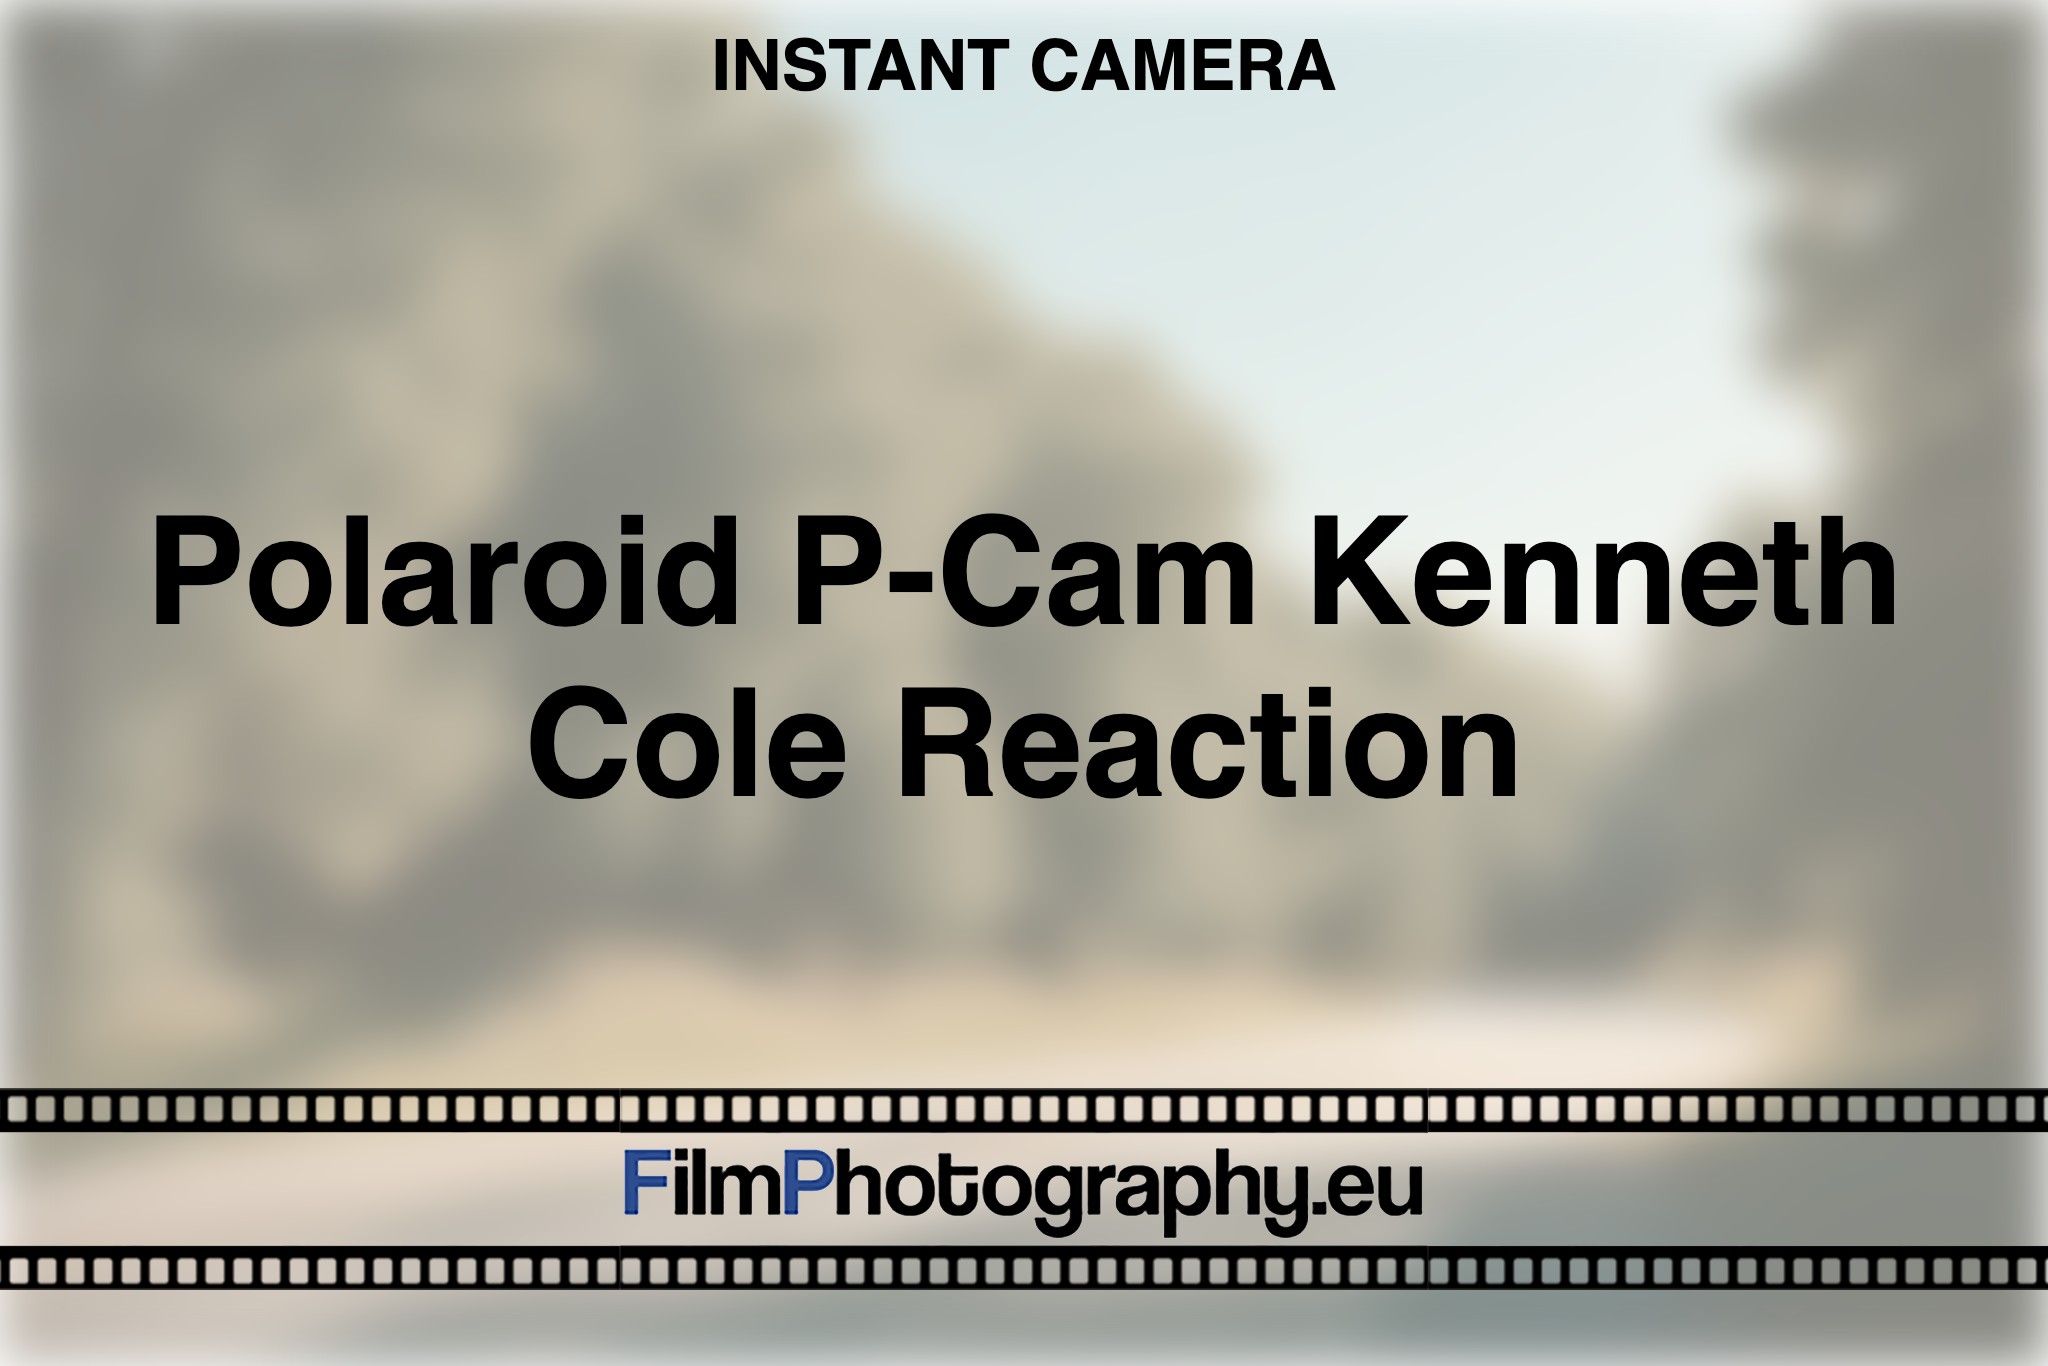 polaroid-p-cam-kenneth-cole-reaction-instant-camera-bnv